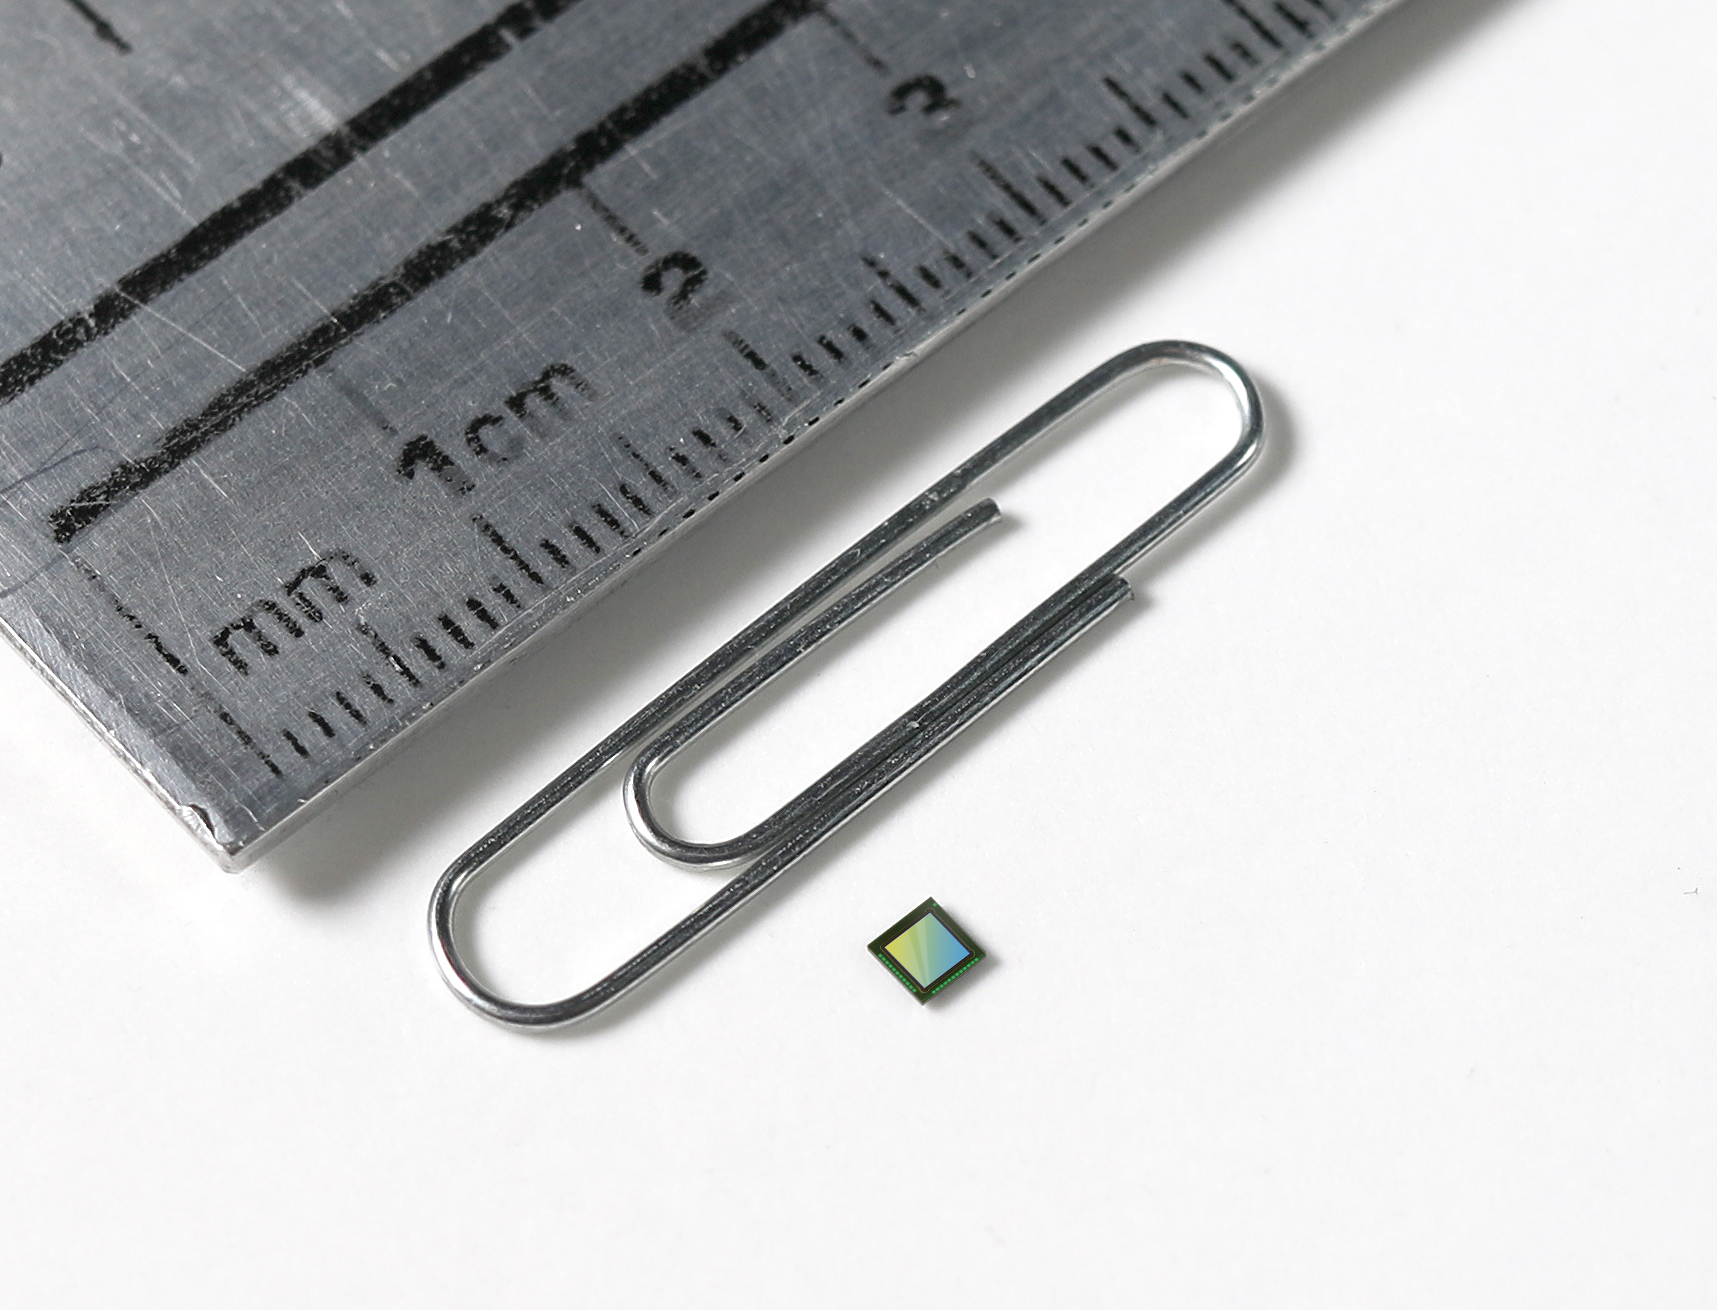 OMNIVISION Announces First Miniature 2-megapixel CMOS Image Sensor in Square Format for Disposable and Reusable Endoscopes